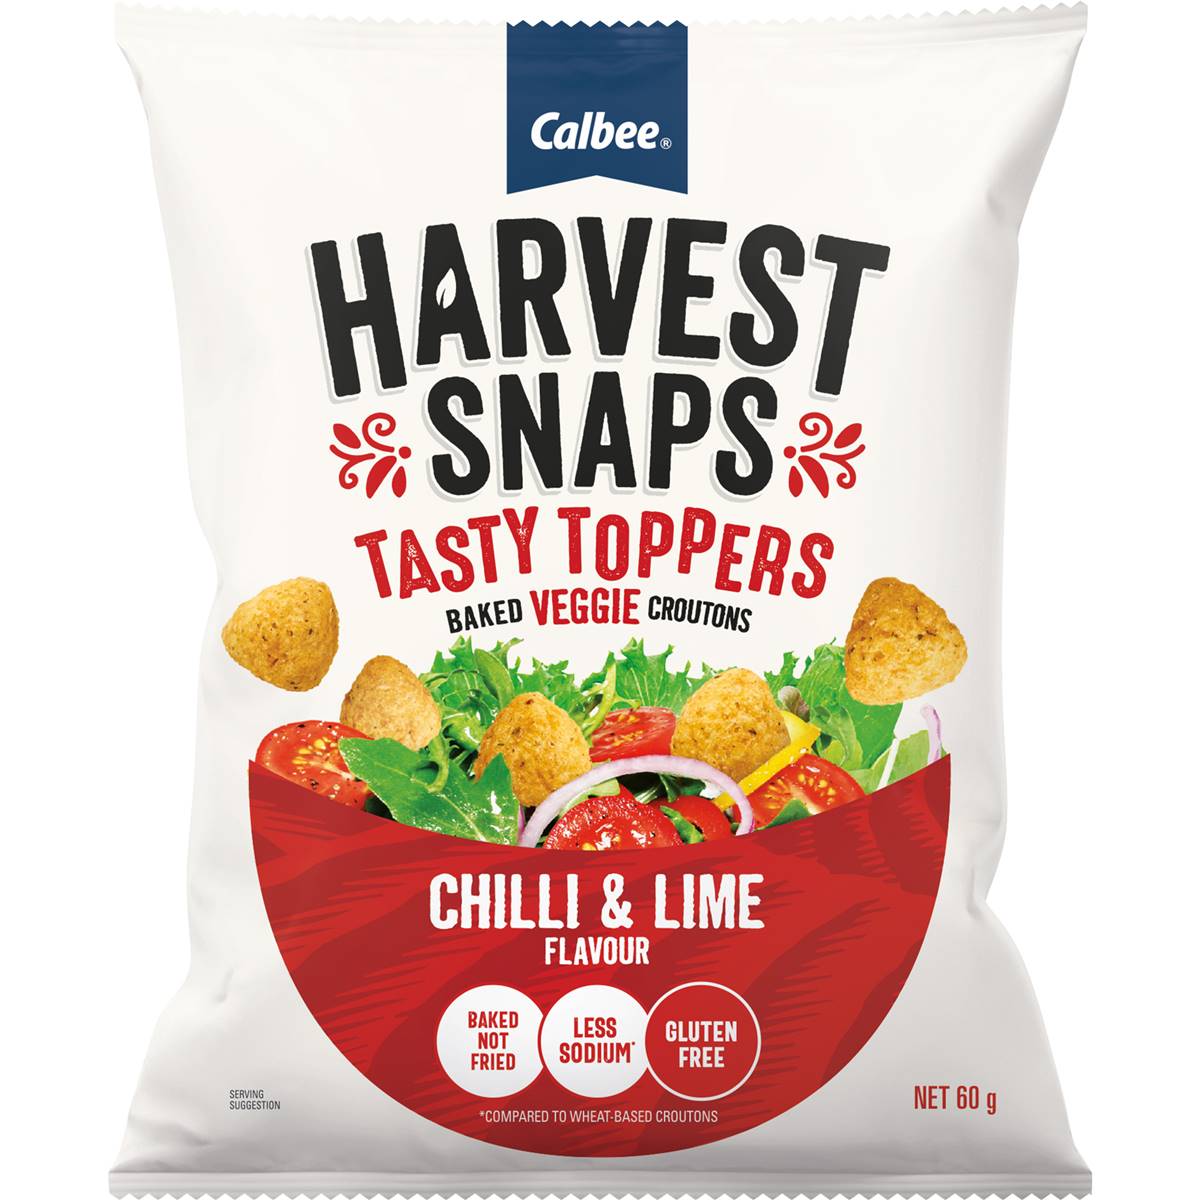 Calories in Calbee Harvest Snaps Tasty Toppers Chilli & Lime Flavour